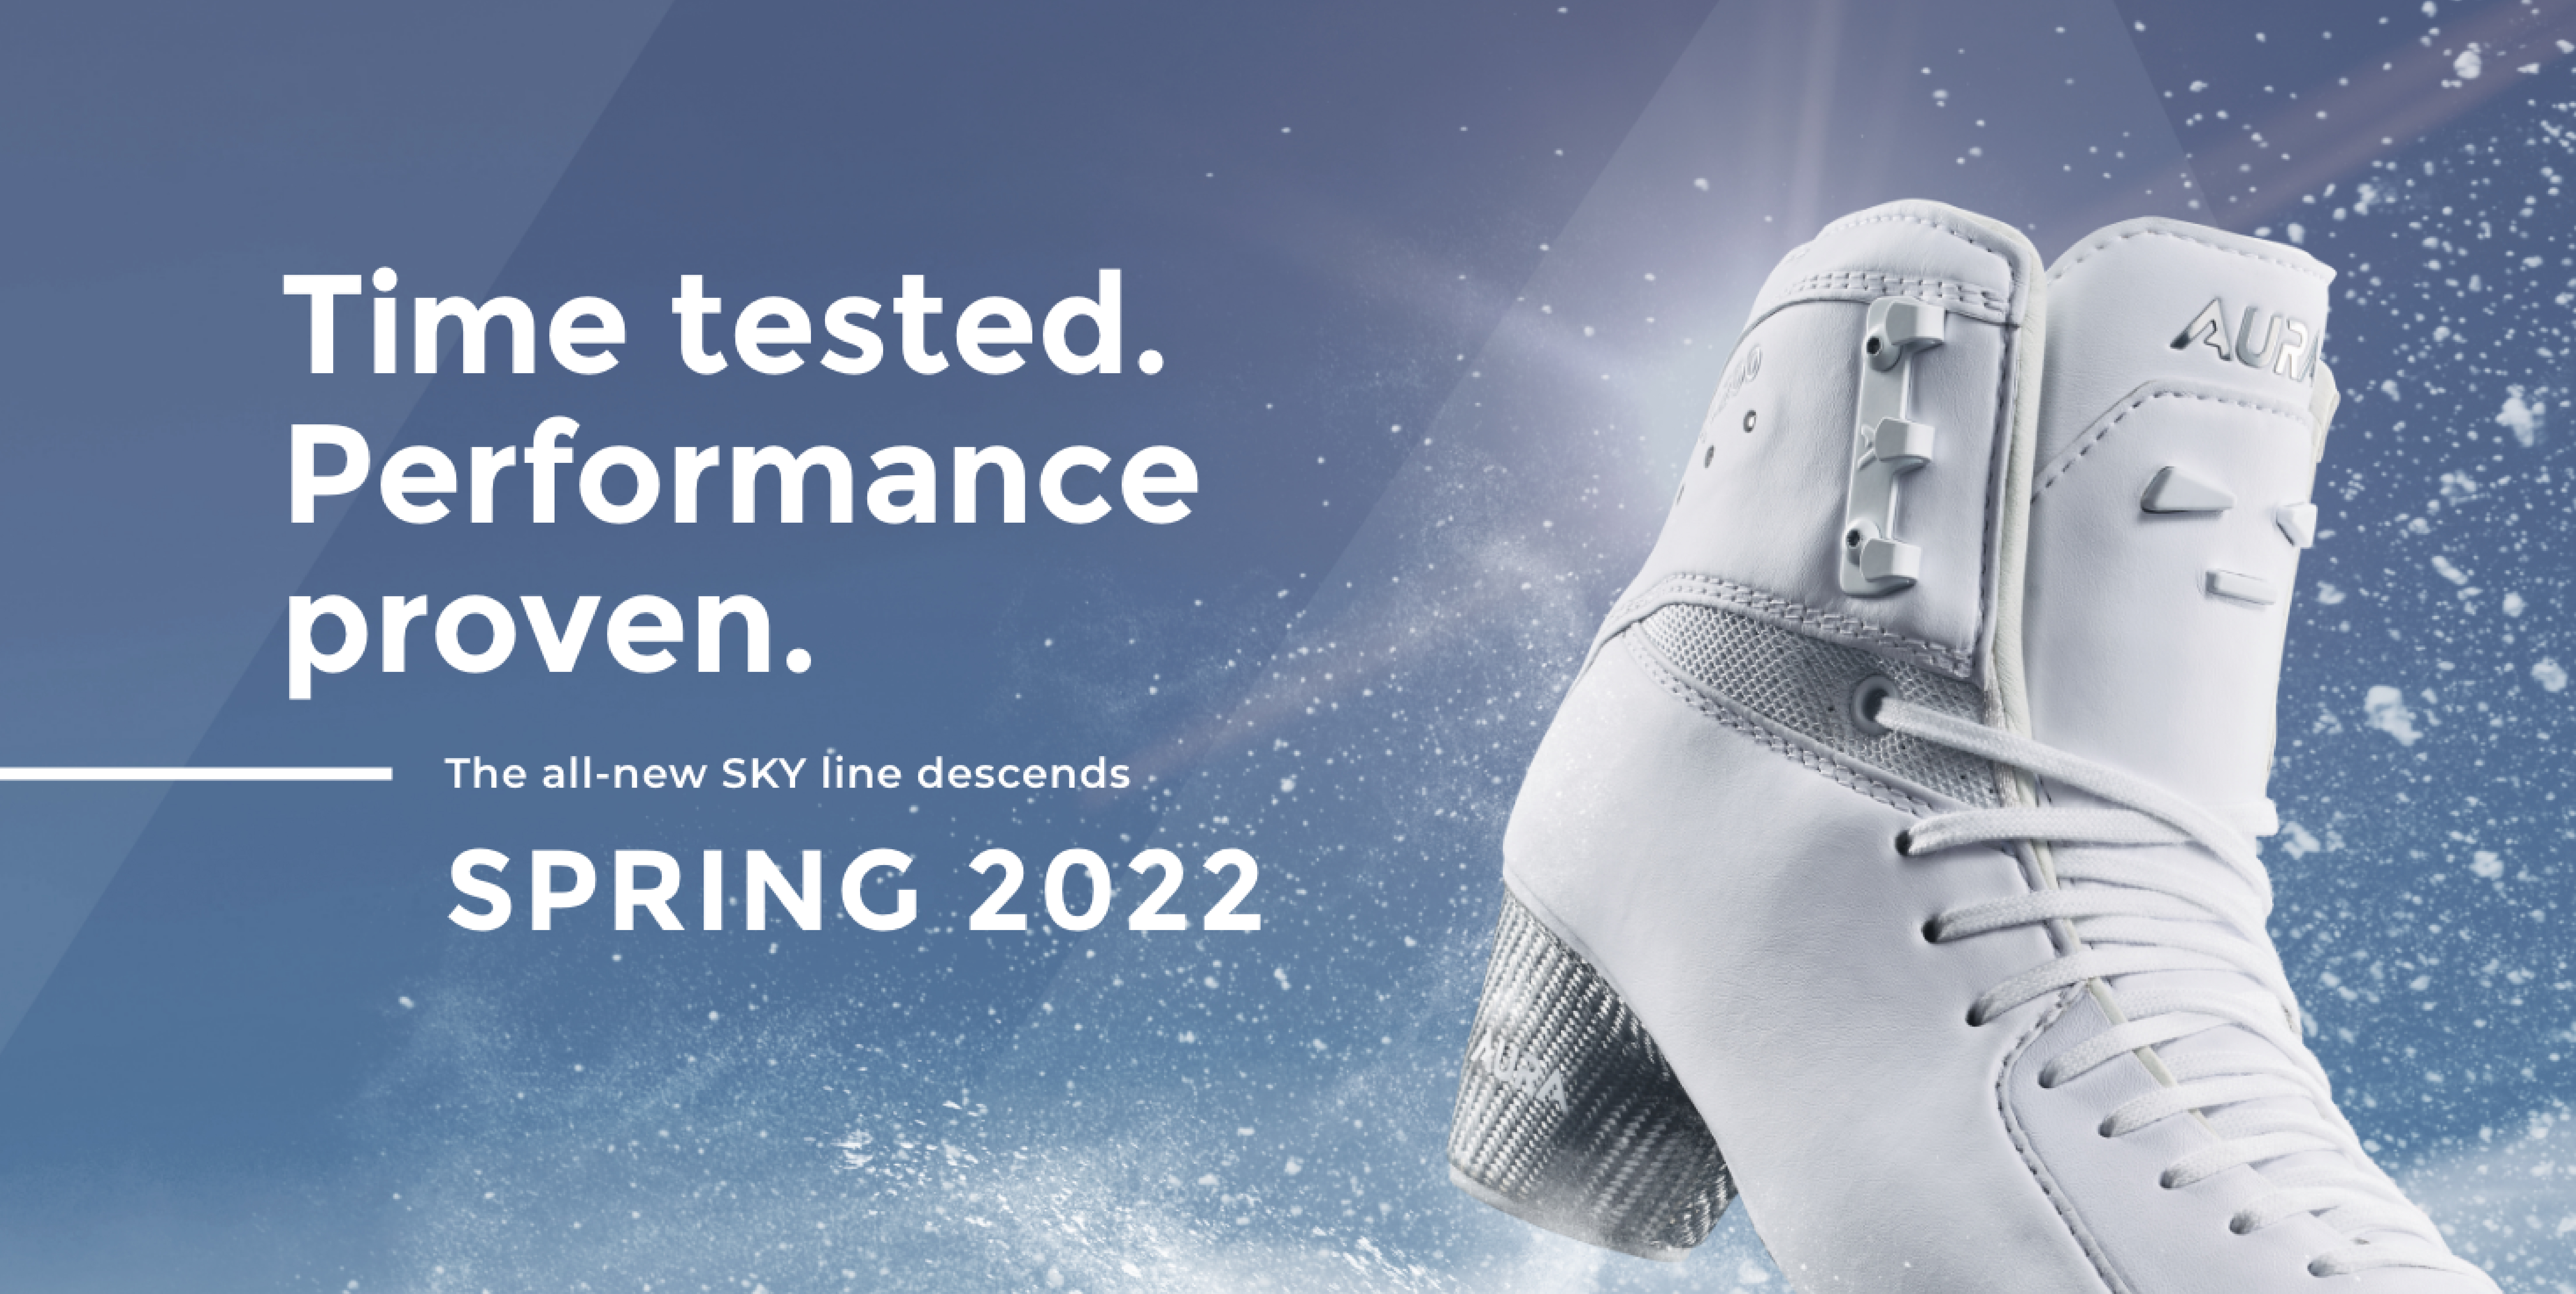 Time tested. Performance proven. The all-new SKY line descends Spring 2022